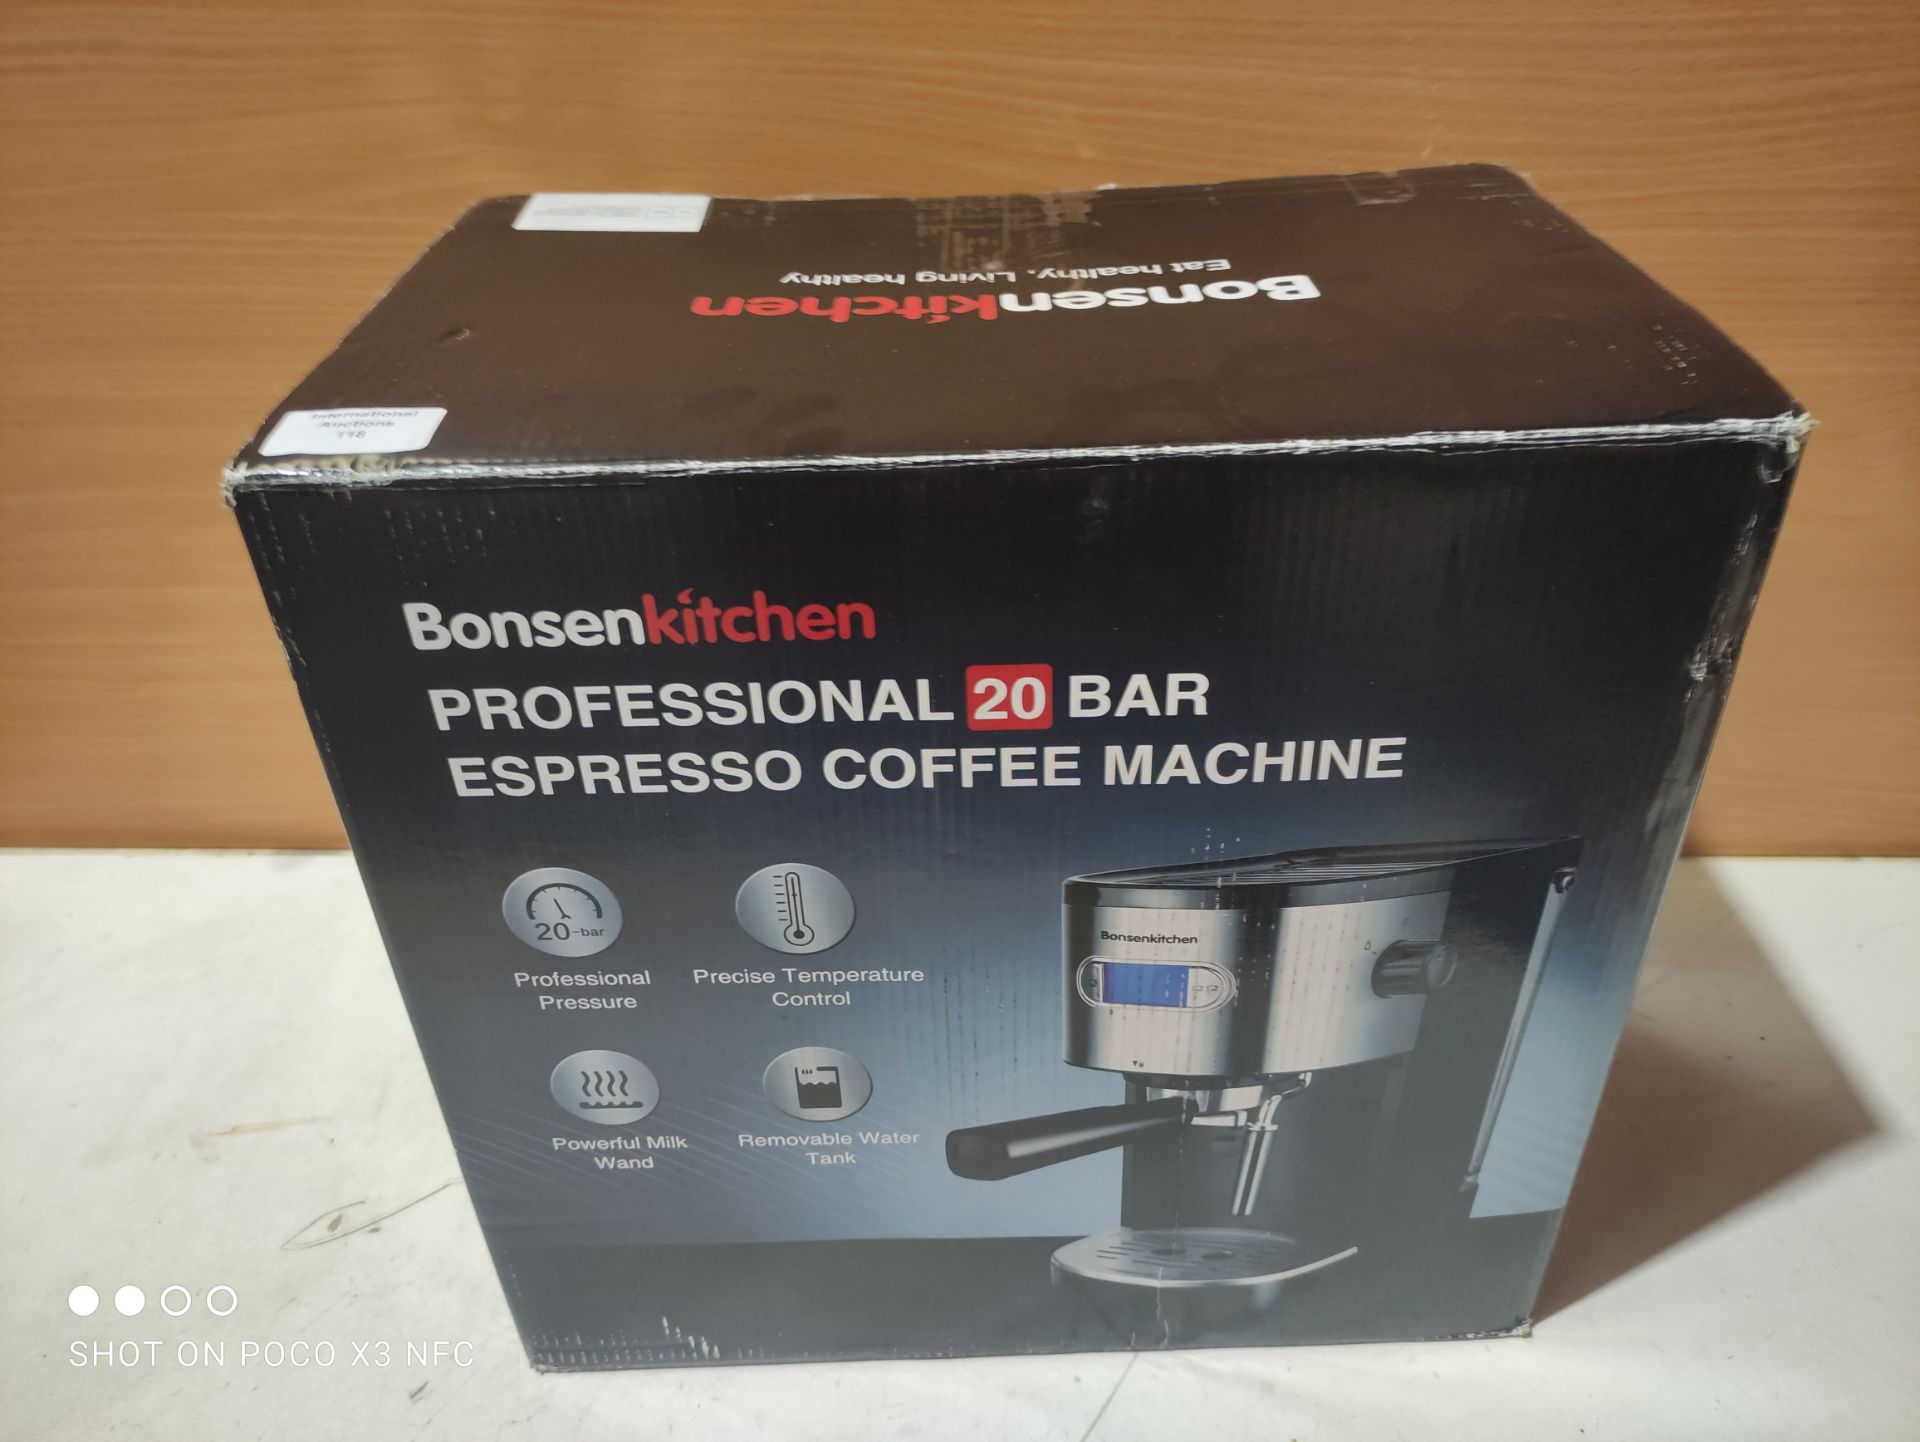 RRP £59.99 Bonsenkitchen 20 Bar Espresso Coffee Machine with Powerful Milk Frother Wand - Image 2 of 2